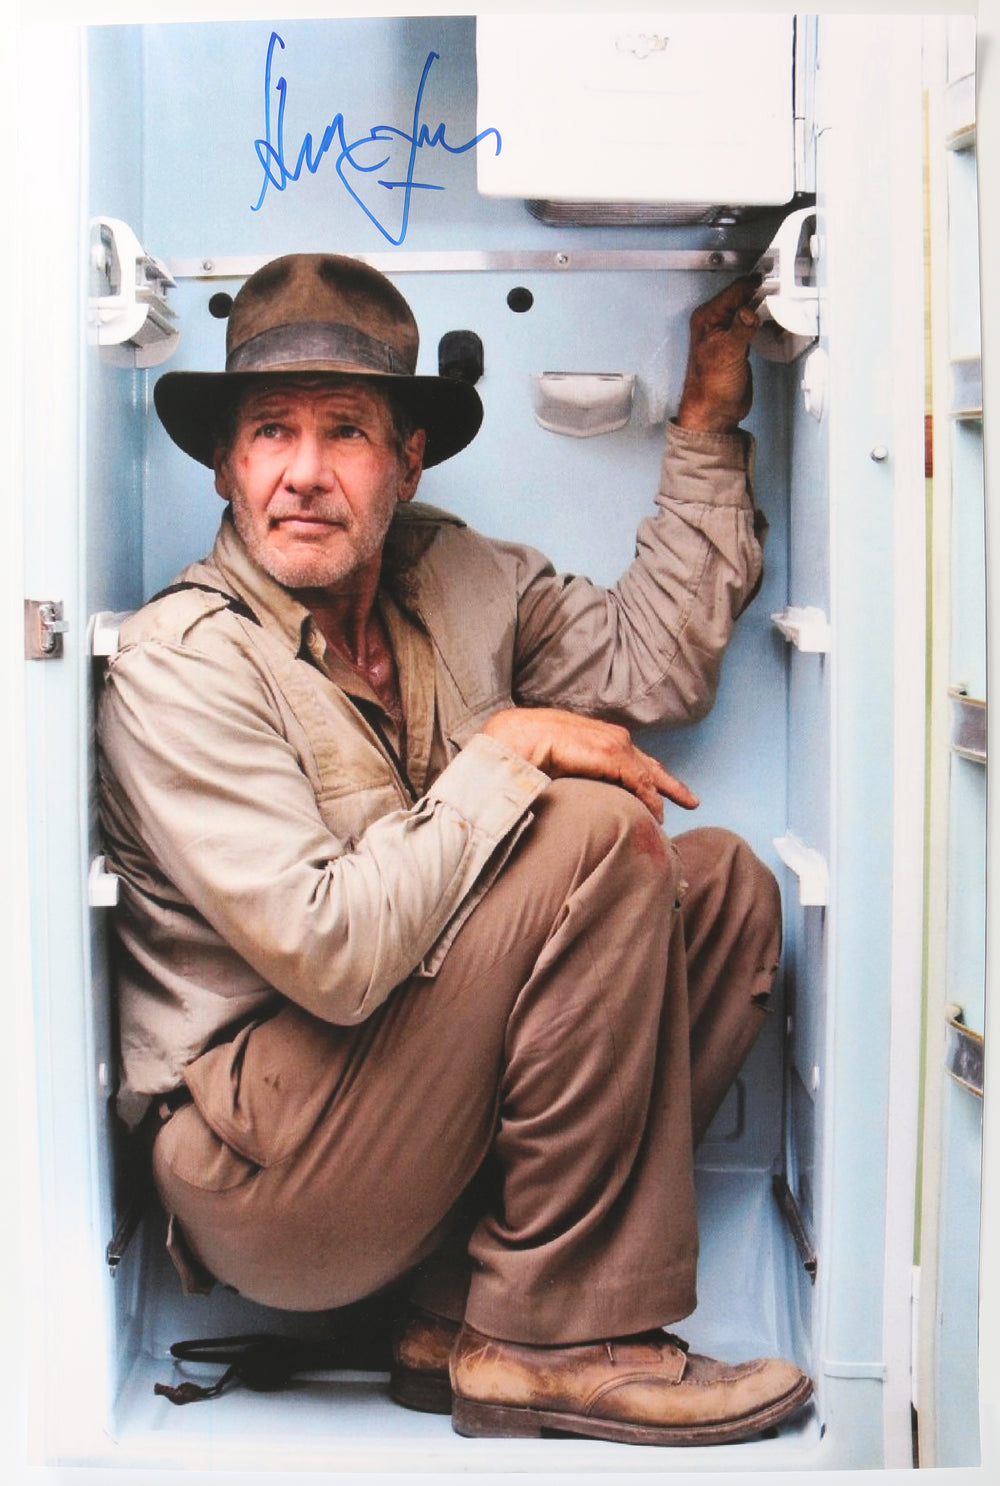 Harrison Ford as Indiana Jones Nuke the Fridge in Indiana Jones and the Kingdom of the Crystal Skull (Beckett Witnessed) Signed 20x30 Poster